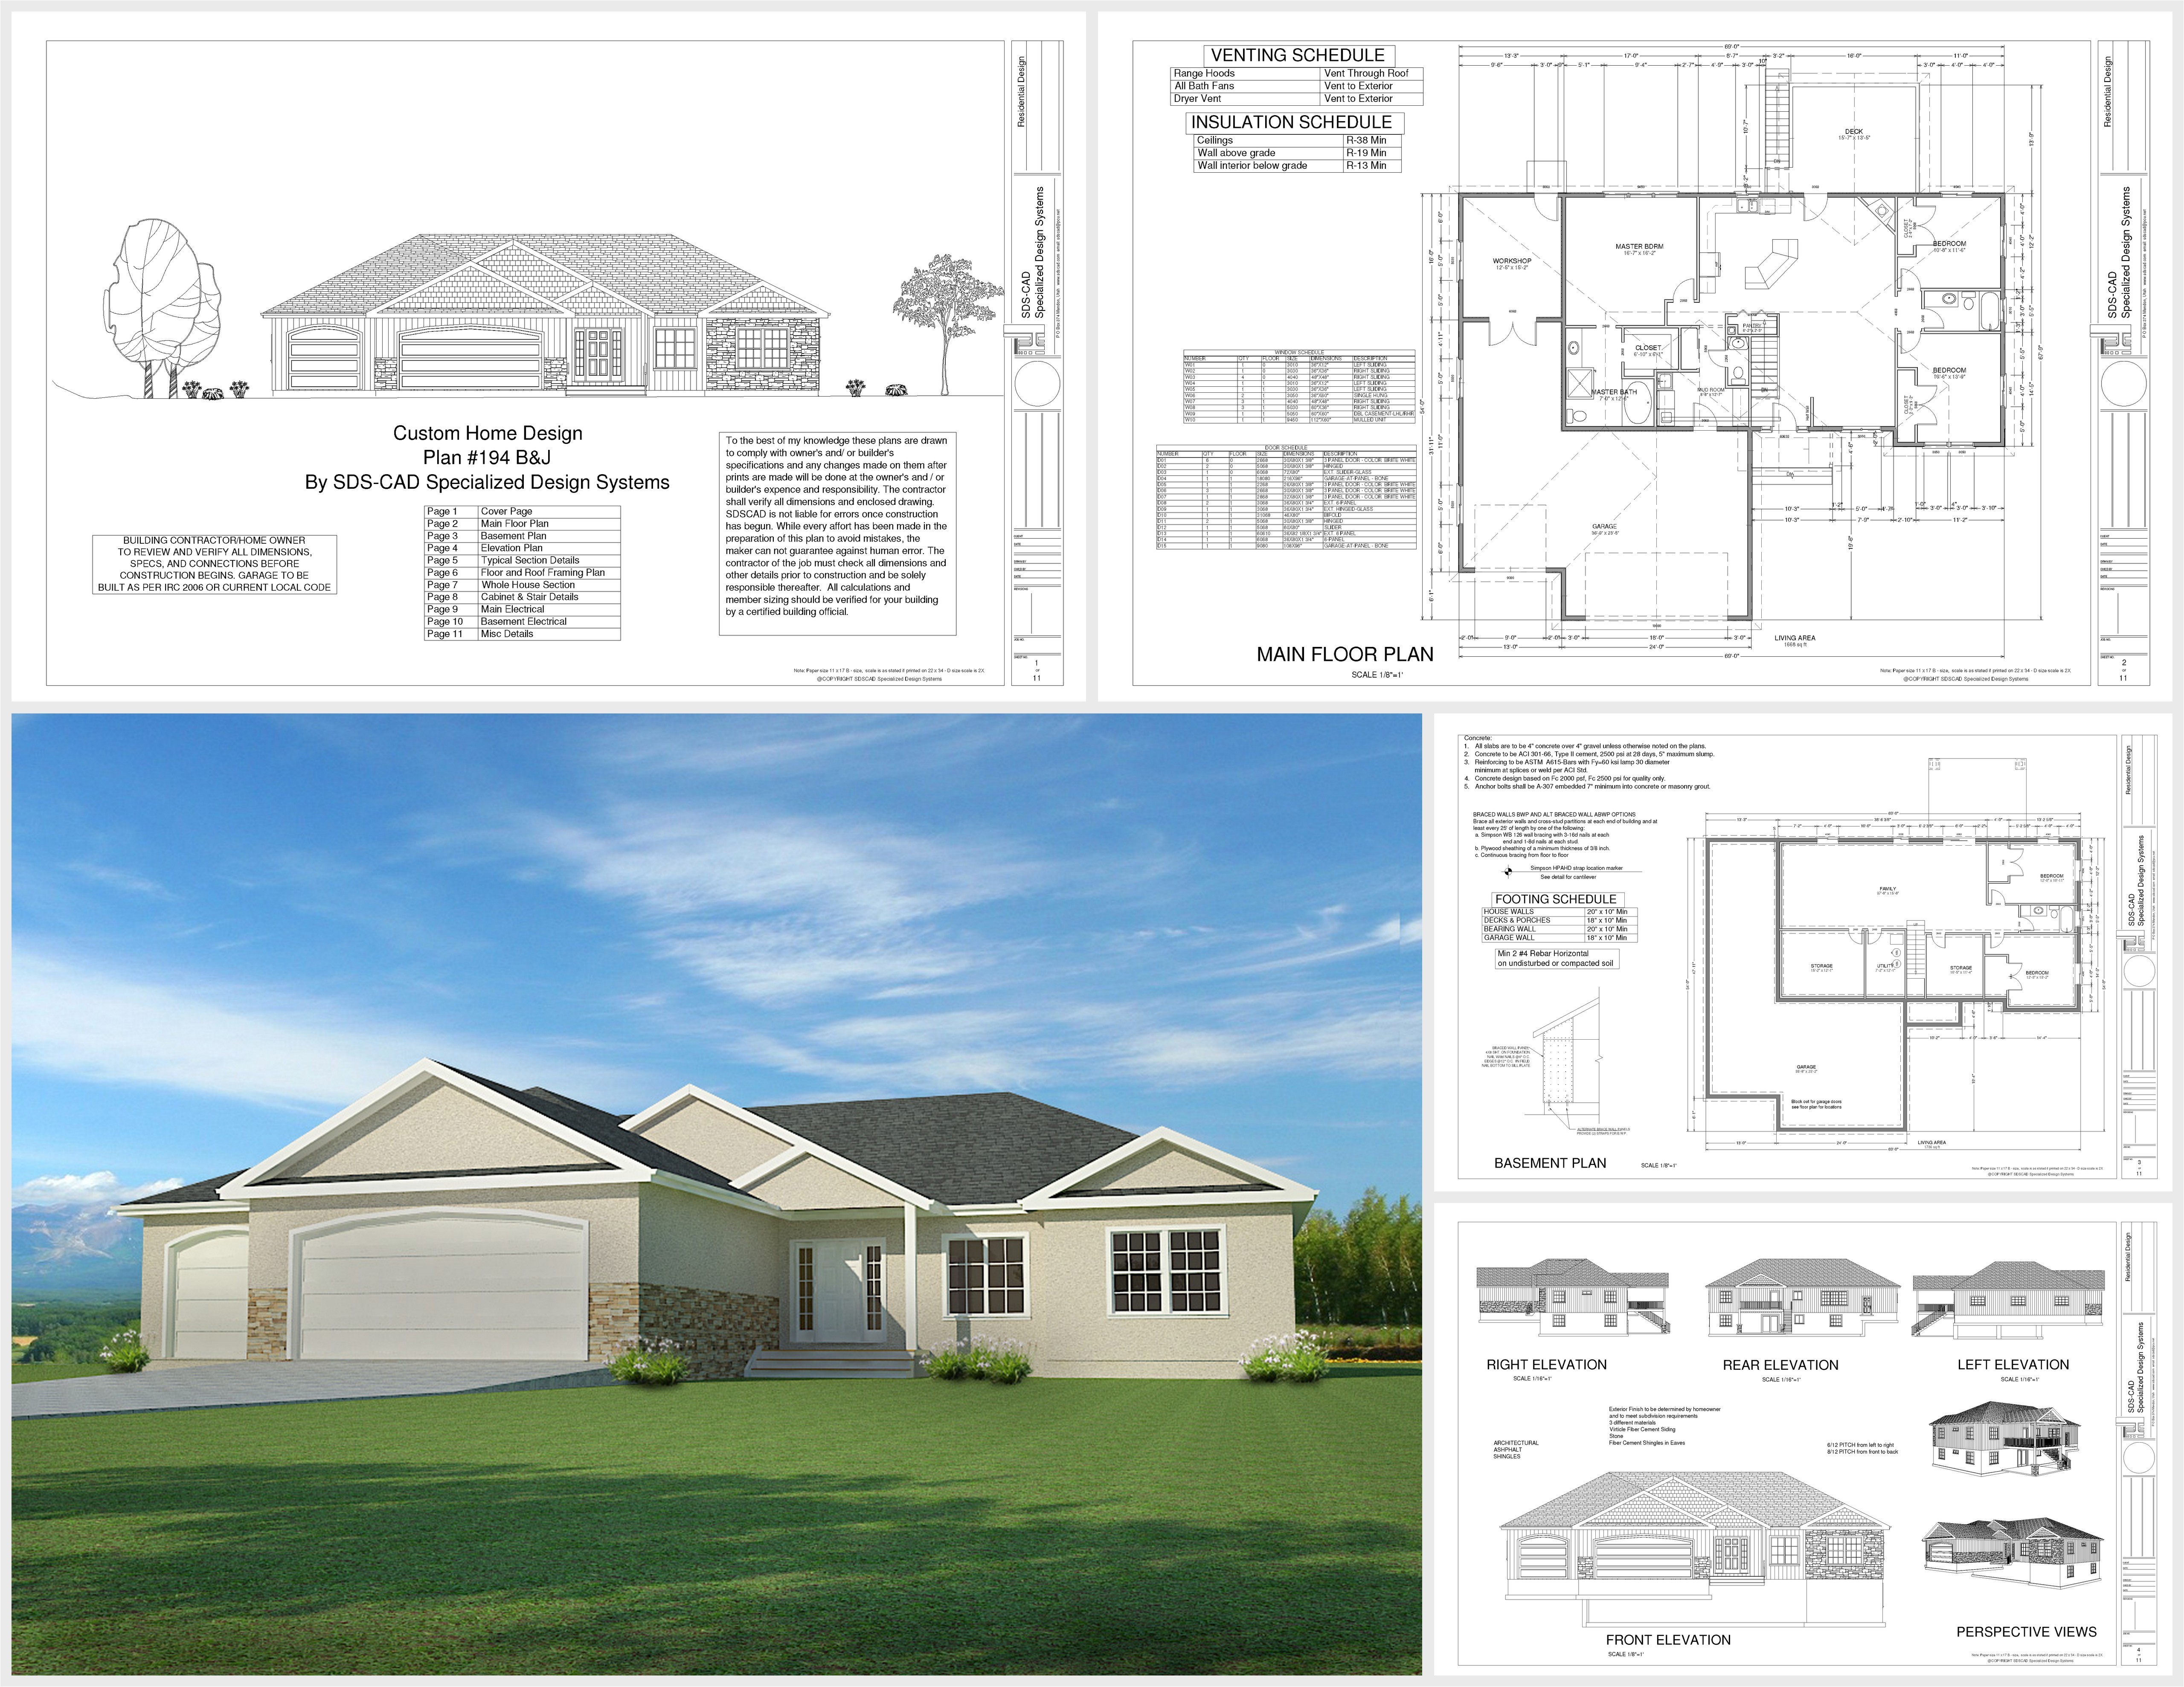 Free Home Plans Download Download This Weeks Free House Plan H194 1668 Sq Ft 3 Bdm